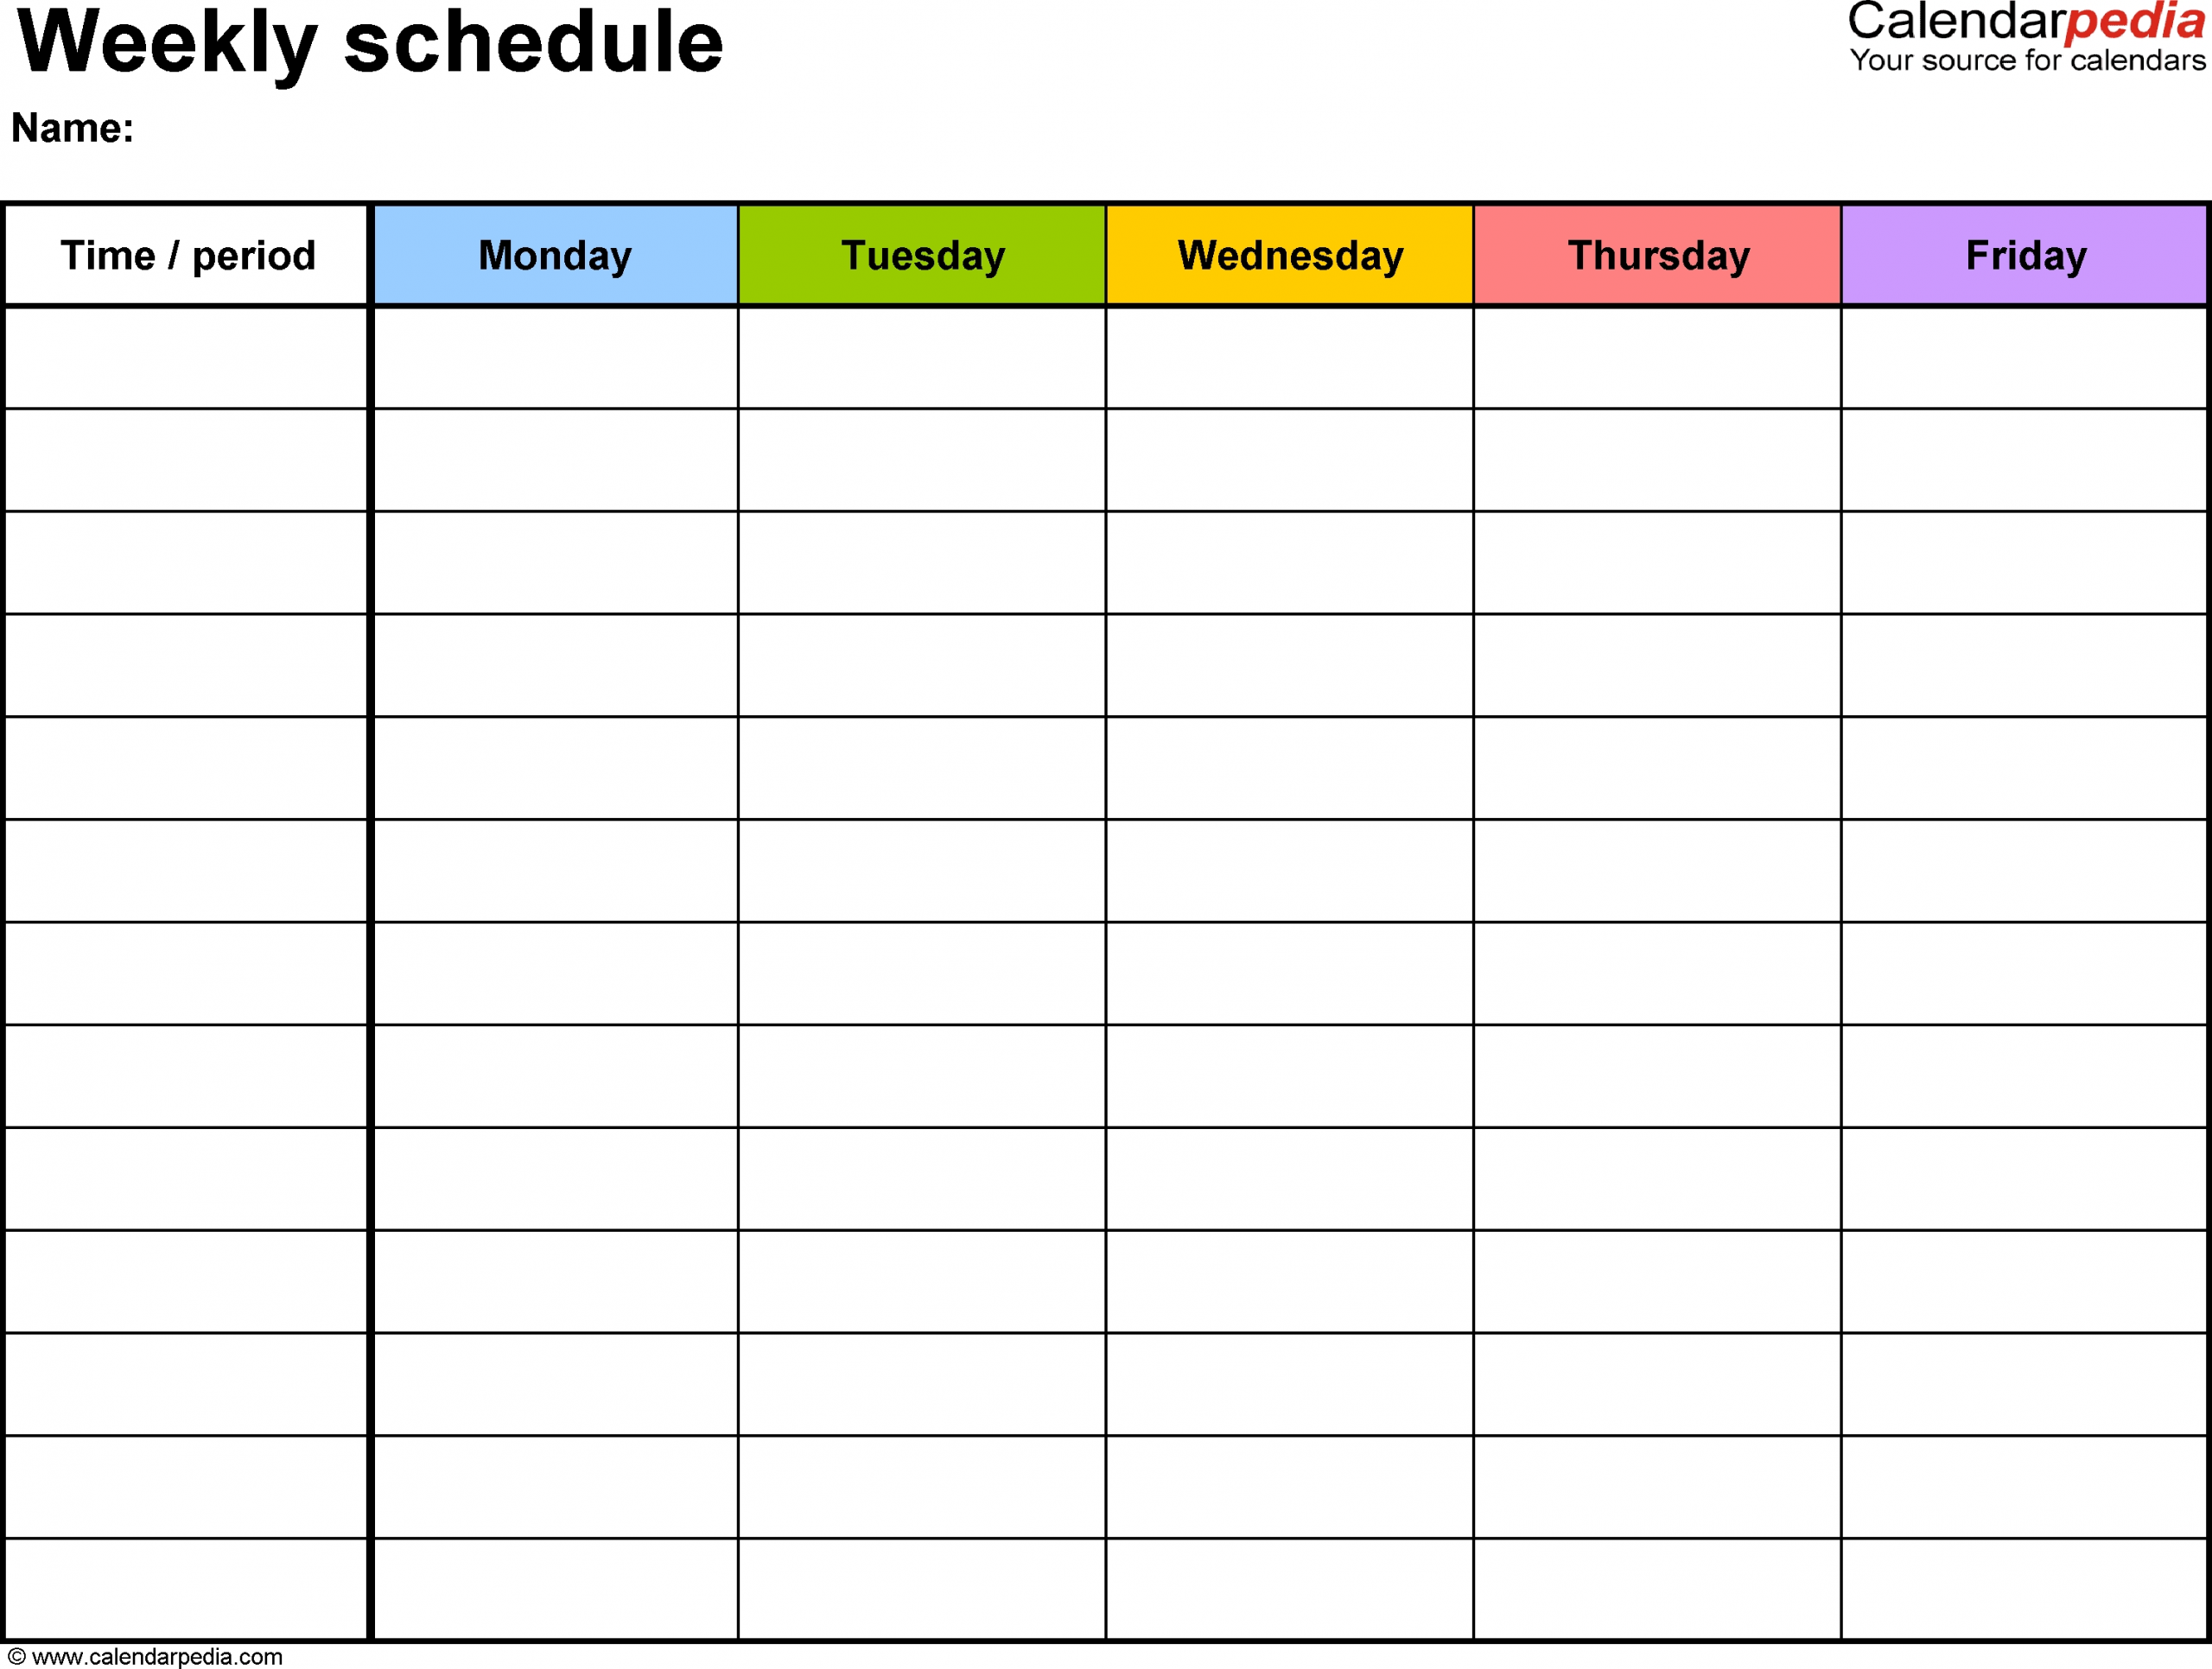 Free Weekly Schedule Templates For Excel - 18 Templates inside Monthly Calendar By Week Excel